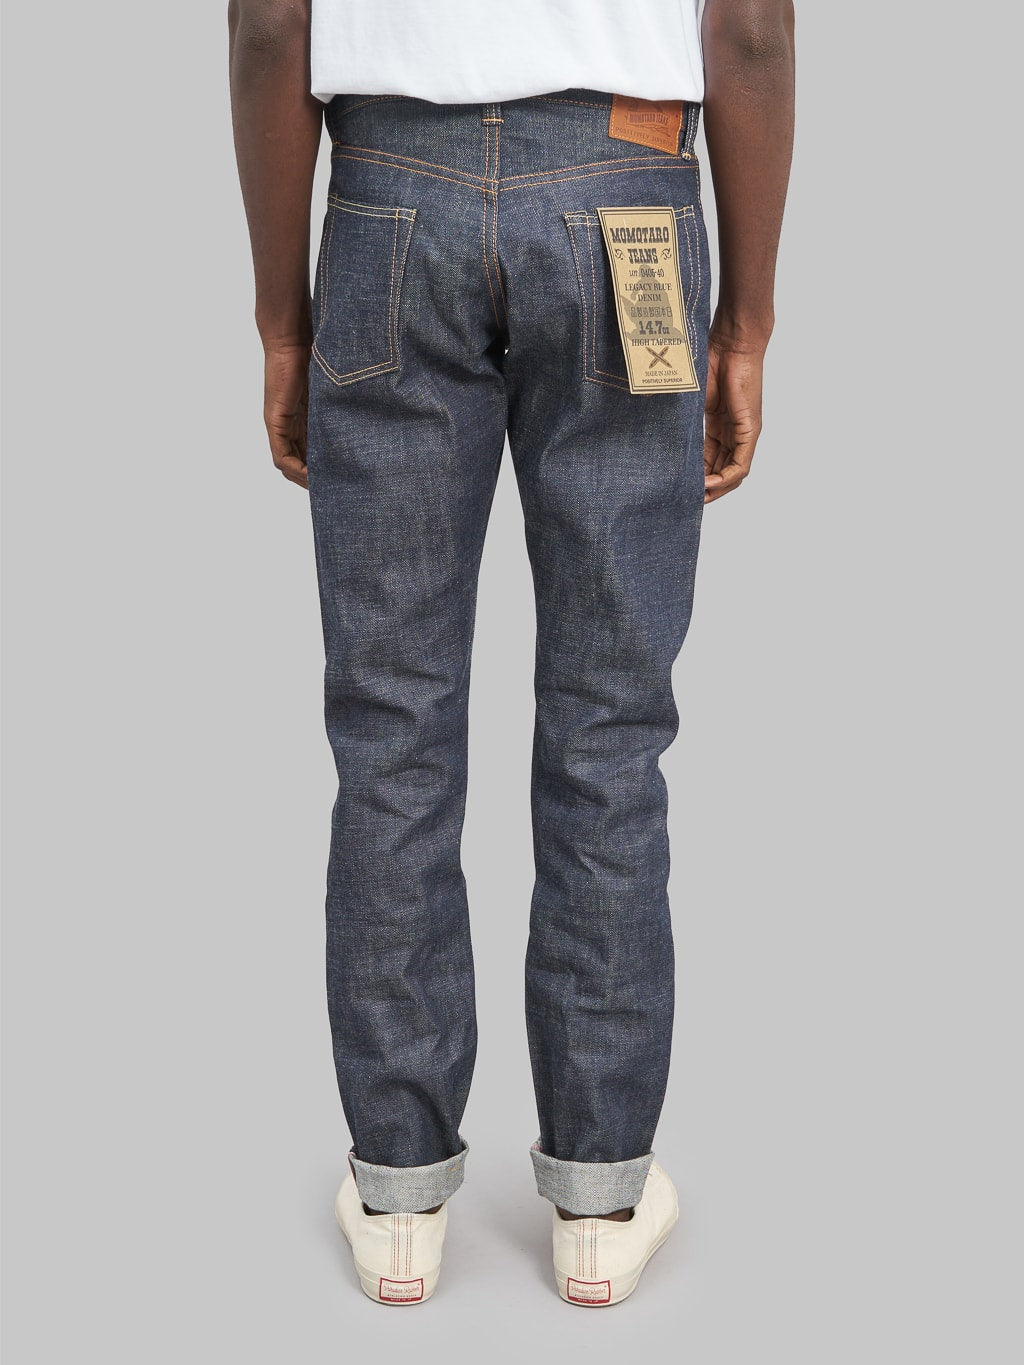 Momotaro legacy blue high tapered jeans back rise